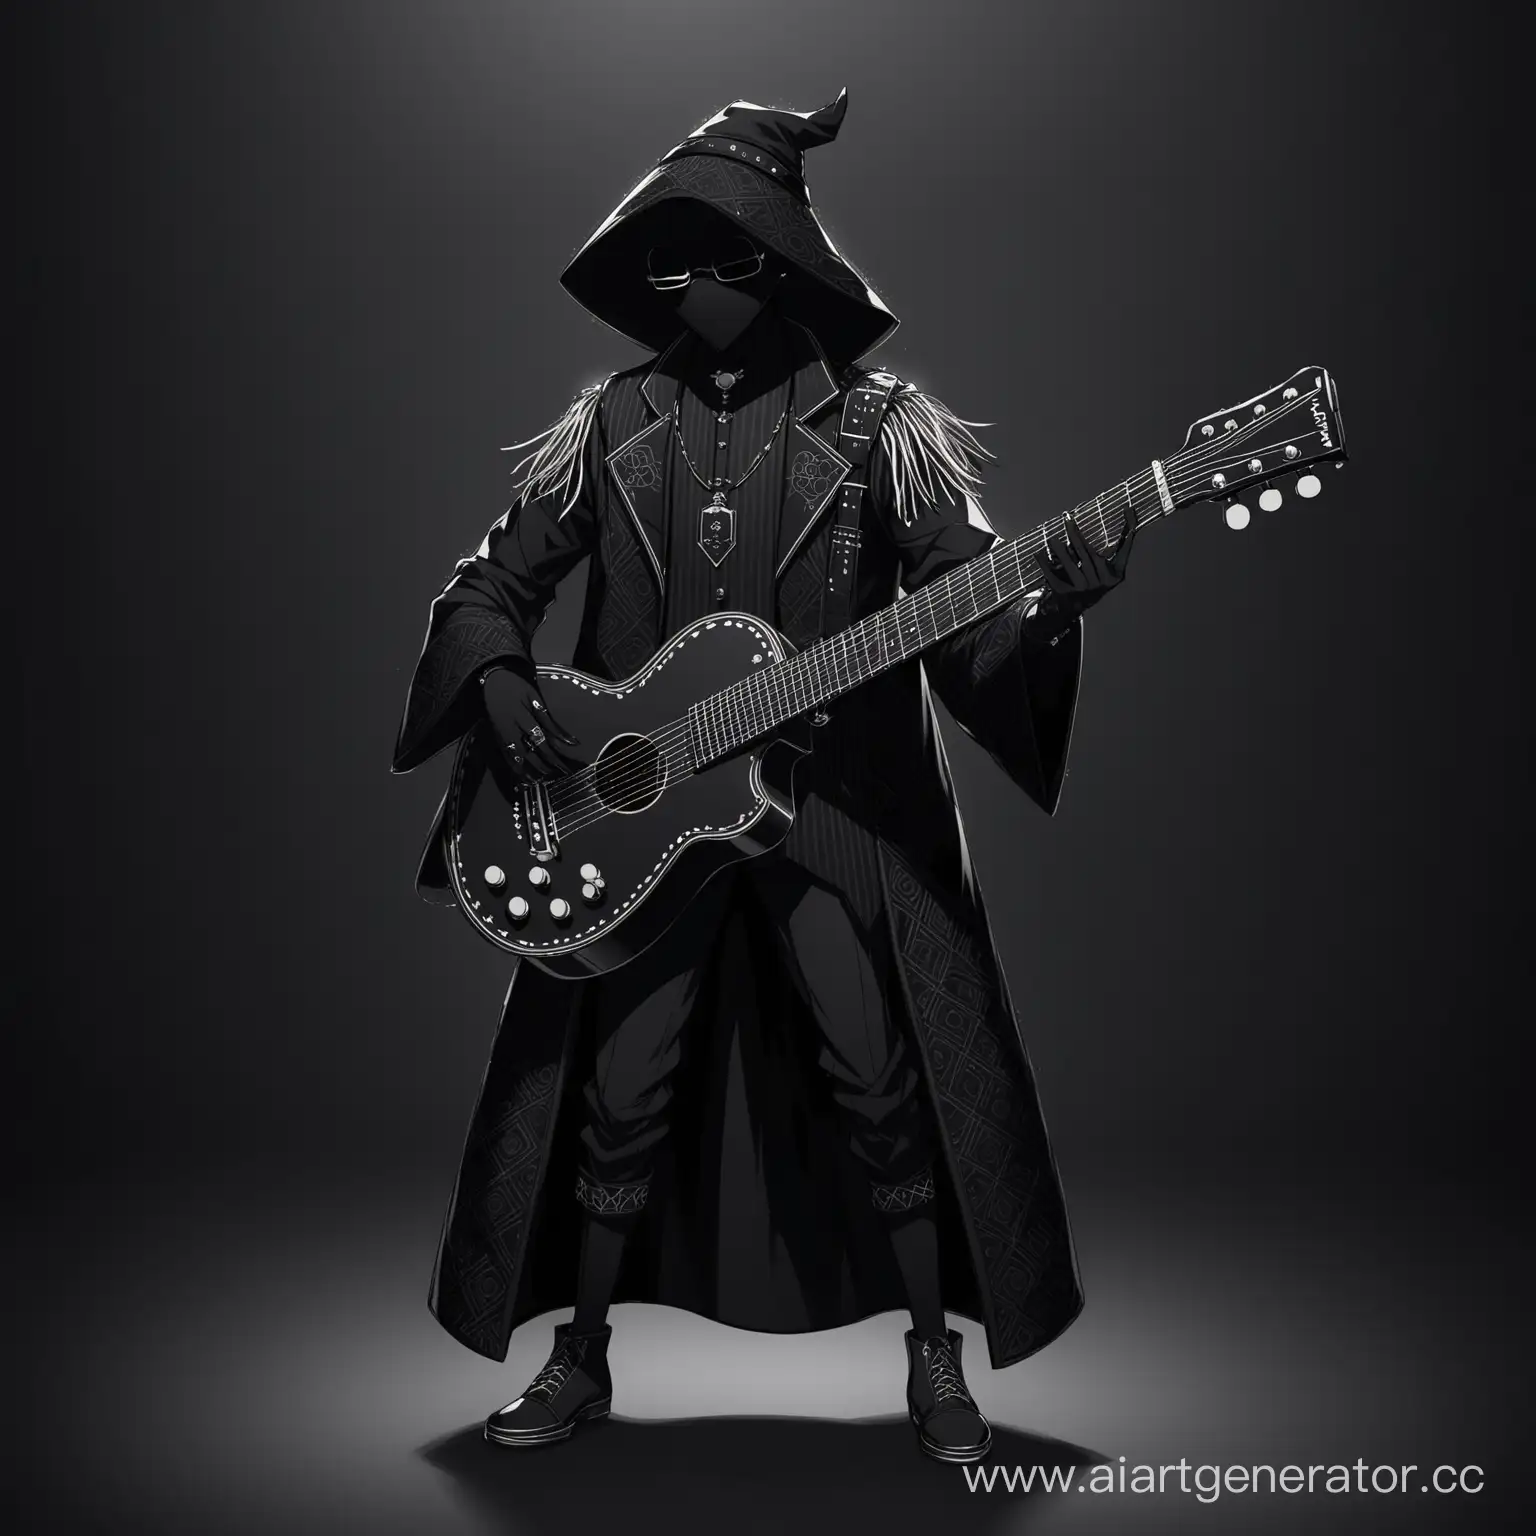 Mysterious-Poco-Musician-with-Dark-Theme-and-Musical-Equipment